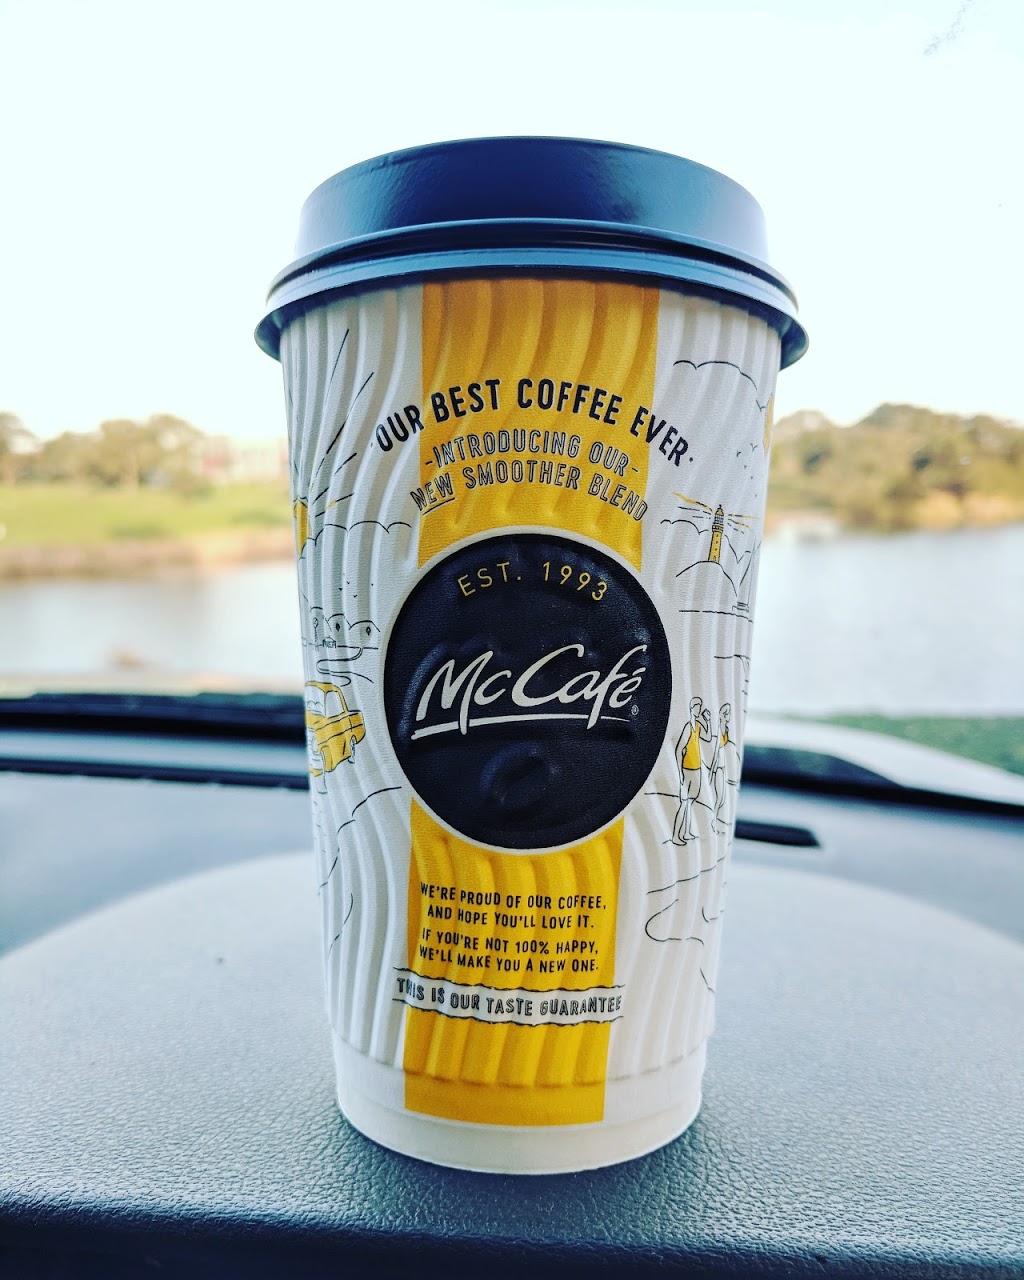 McDonalds Geelong North | meal takeaway | 400 Melbourne Rd, Norlane VIC 3220, Australia | 0352722350 OR +61 3 5272 2350